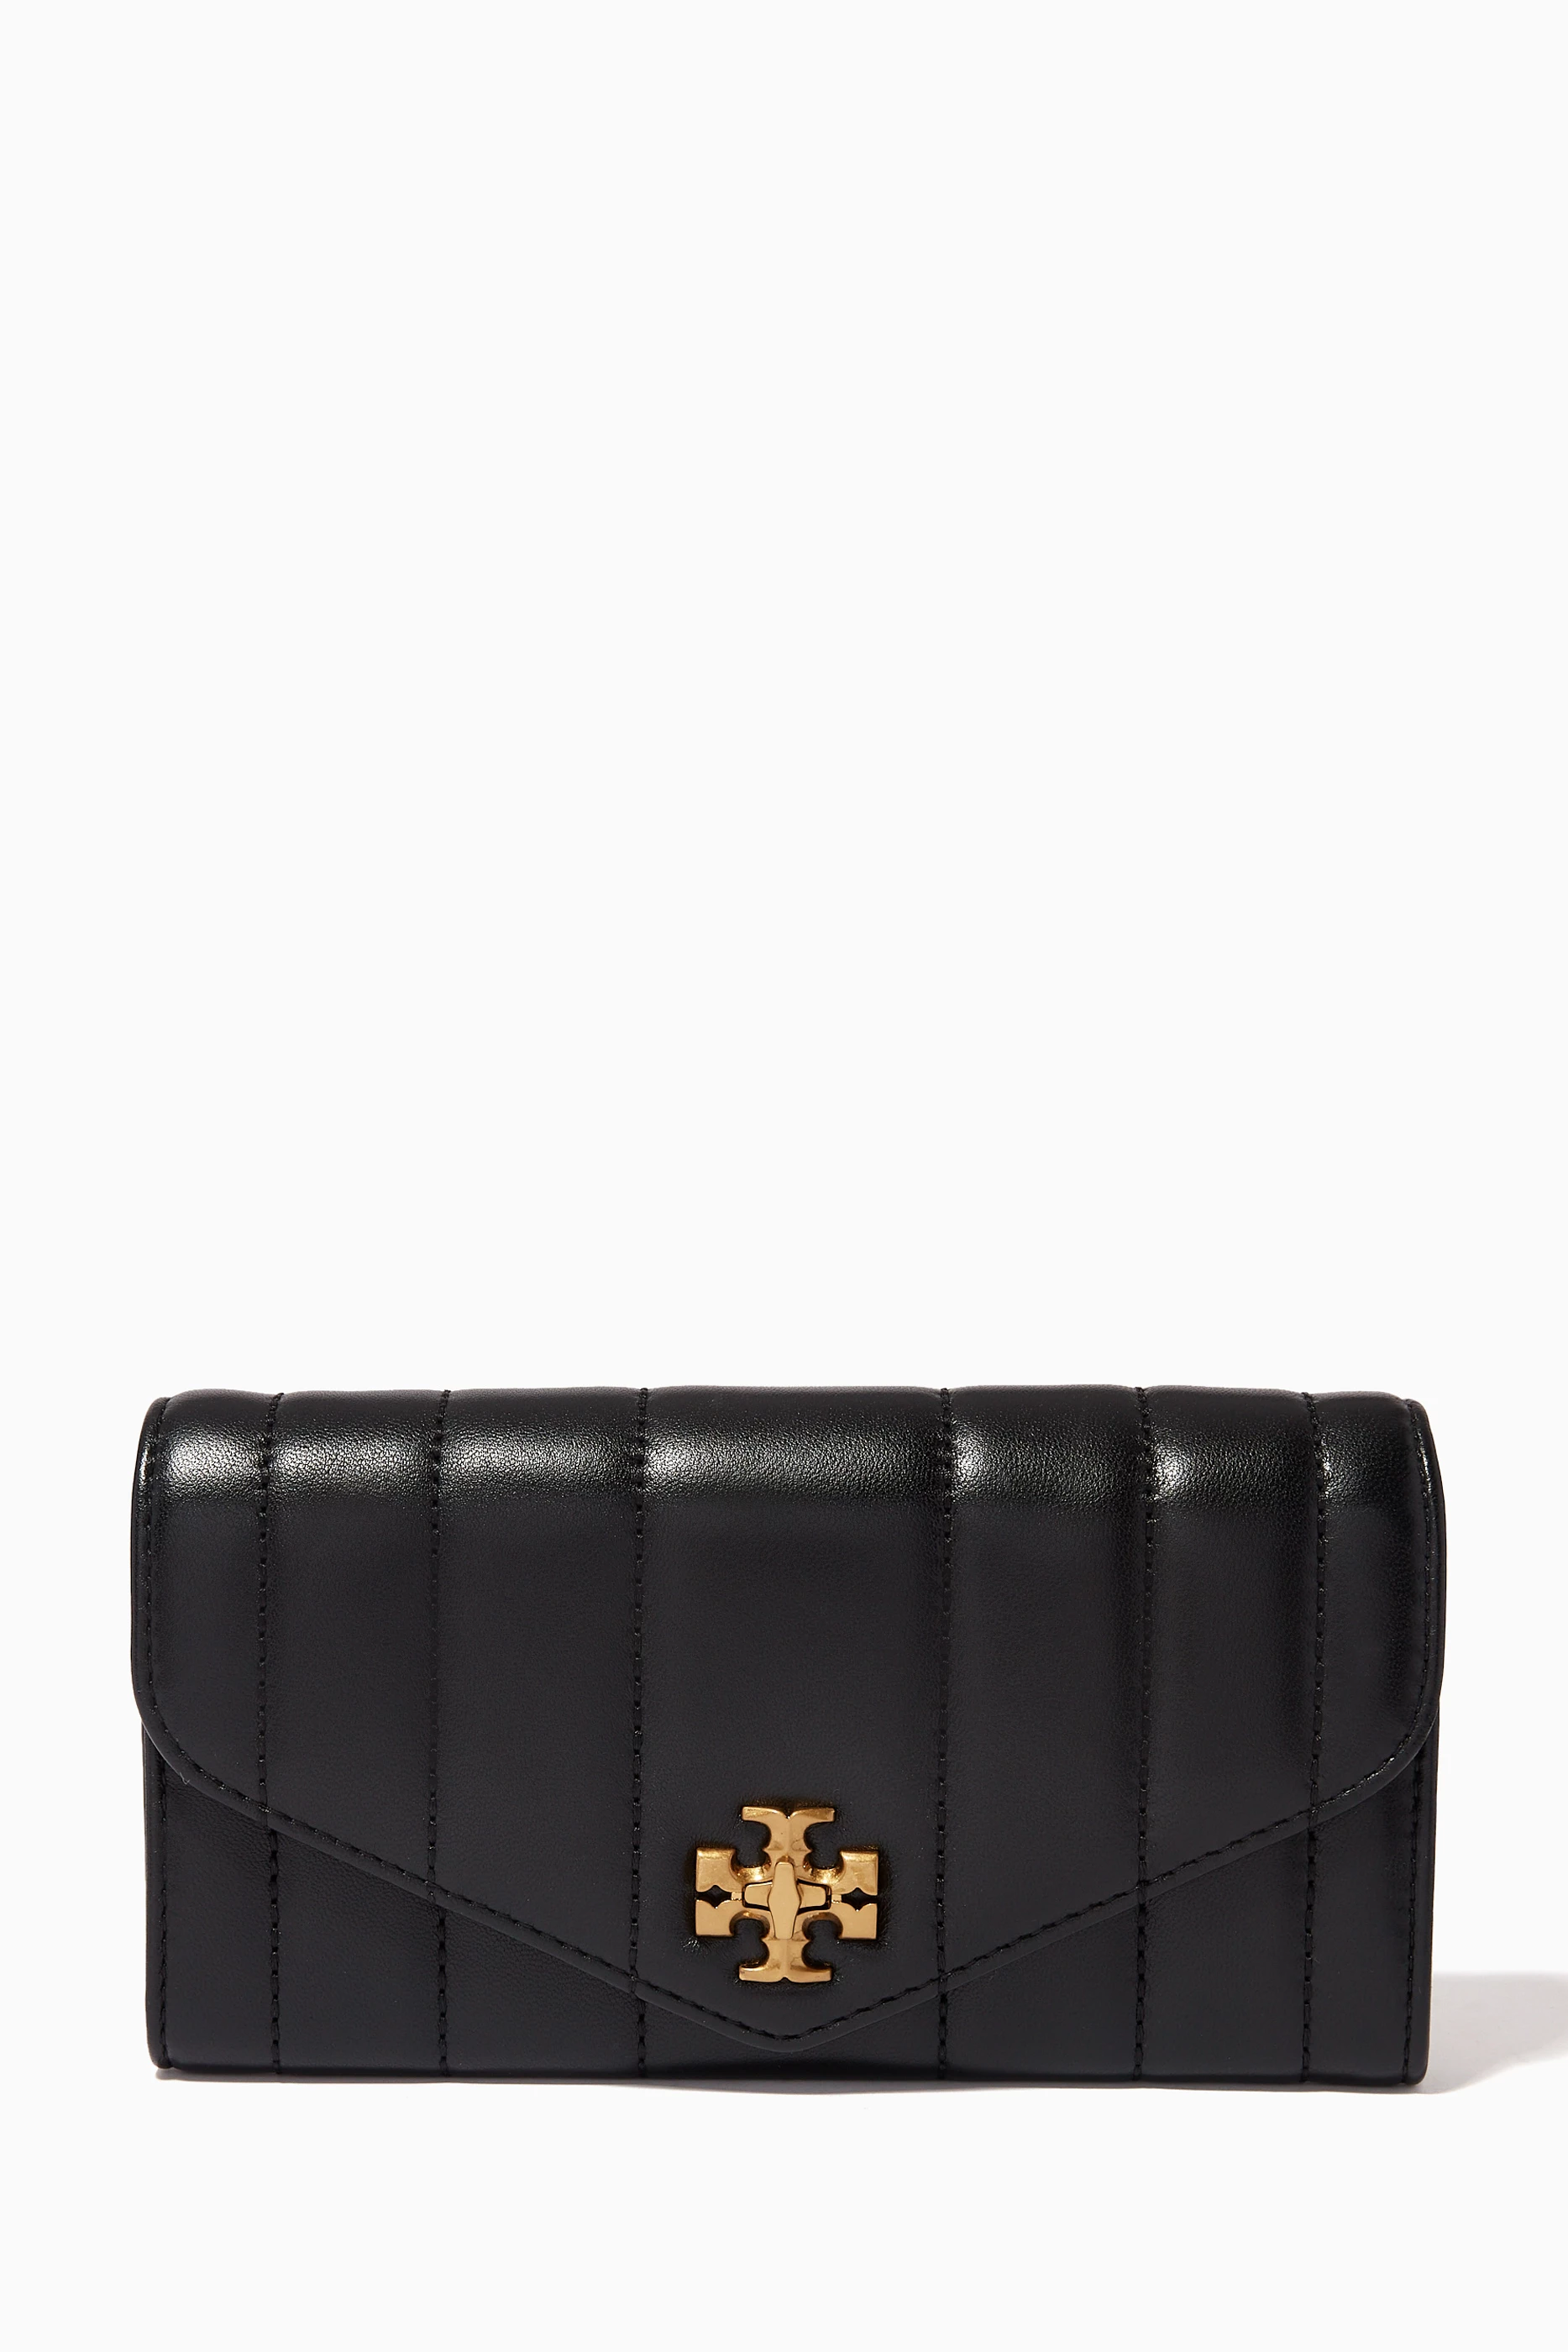 Buy Tory Burch Black Kira Envelope Wallet in Quilted Leather ...